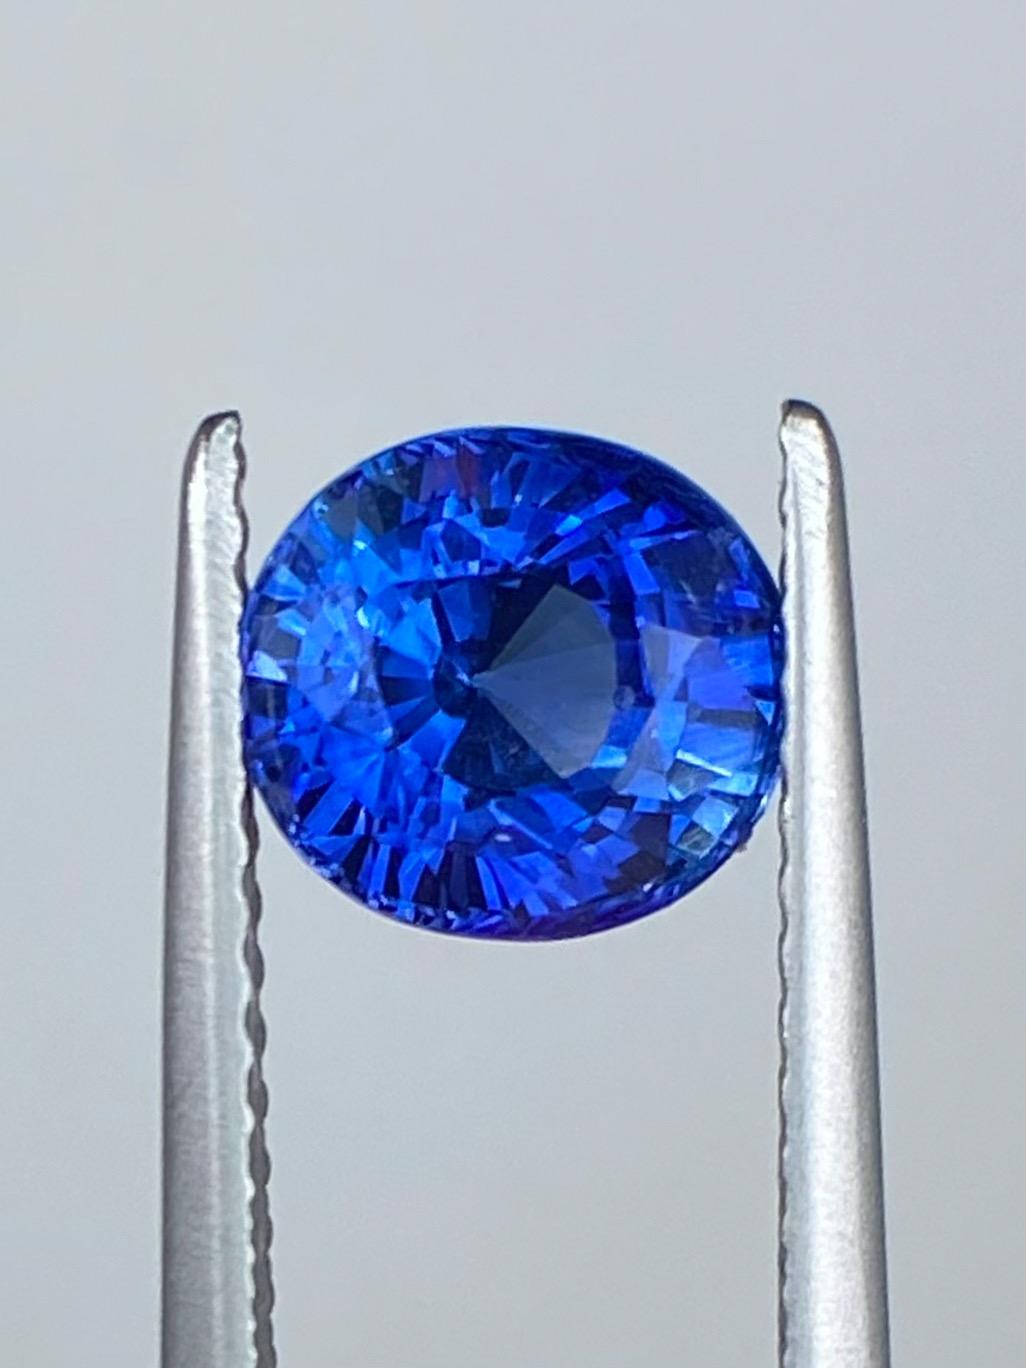 The Sapphire Merchant proudly presents this 1.85ct Natural Vivid Blue Sapphire. Expertly faceted in an elegant oval shape, this stunning jewel boasts a Munsell Color Grade of 5PB 4T 14S (considered the highest grade of colour), which showcases its